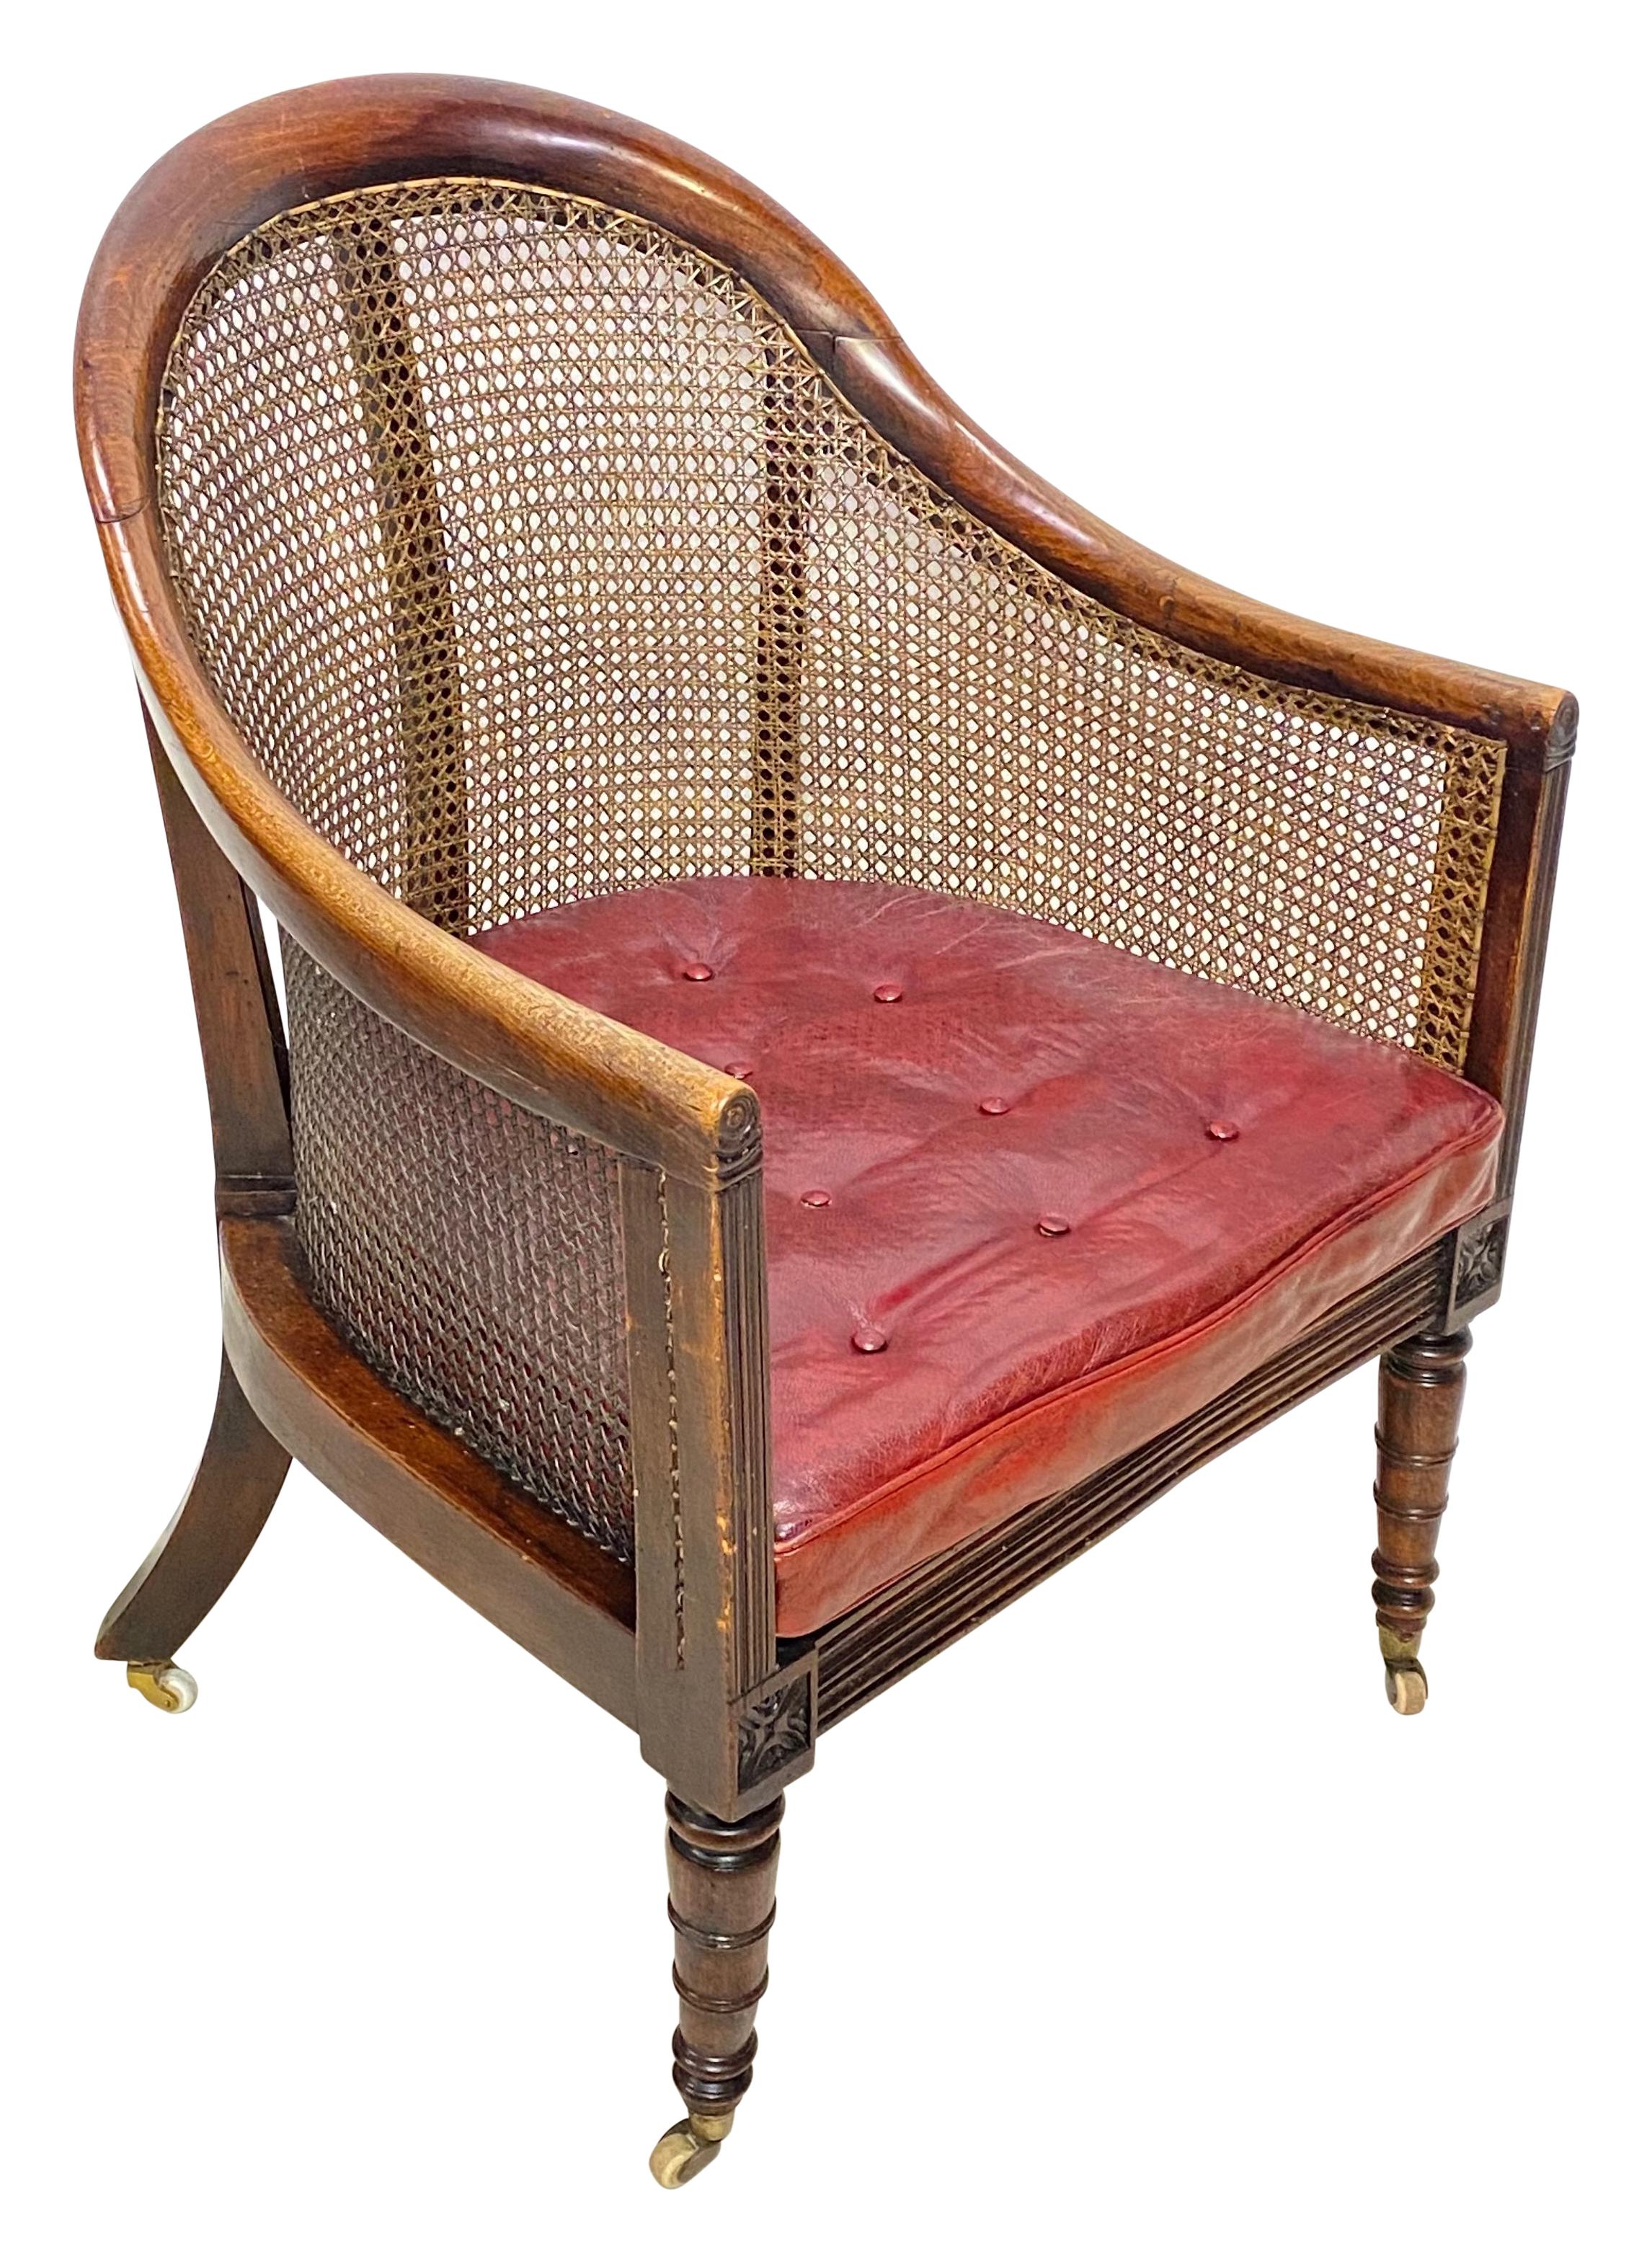 An early 19th century George III mahogany library chair in exceptional condition with original finish and patina. All caning is in perfect condition, Cordovan leather cushion has original horsehair stuffing (cushion has leather on both